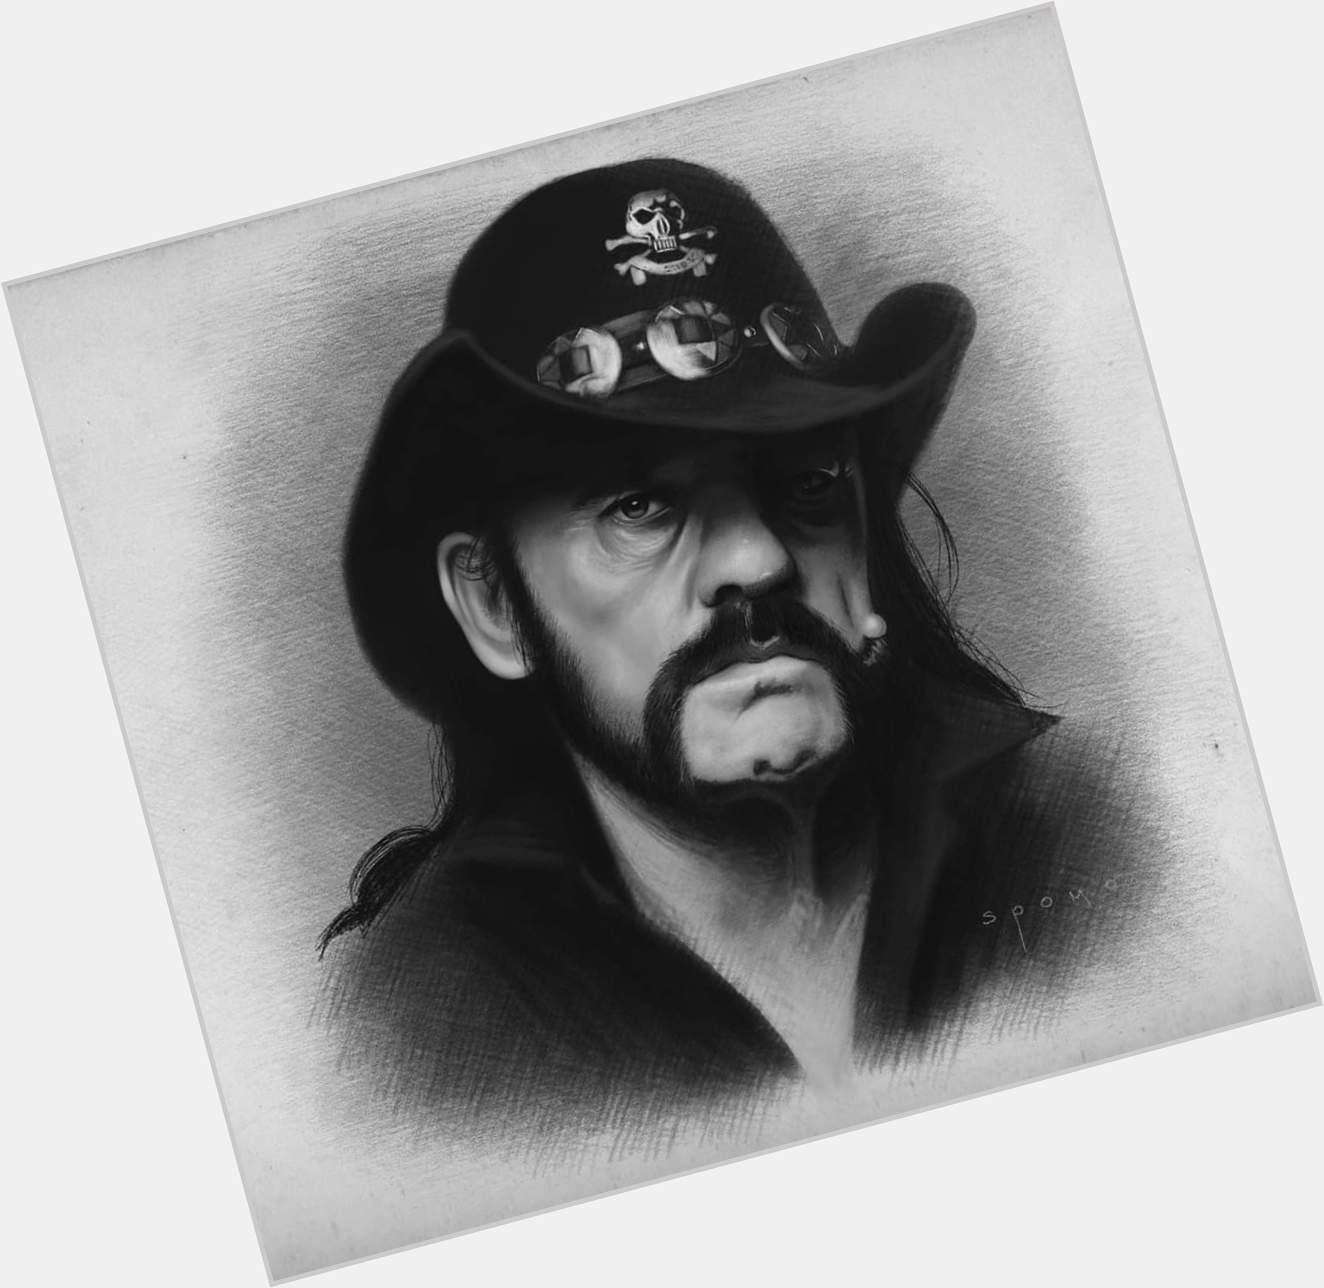 Happy birthday to the Late Lemmy Kilmister! 